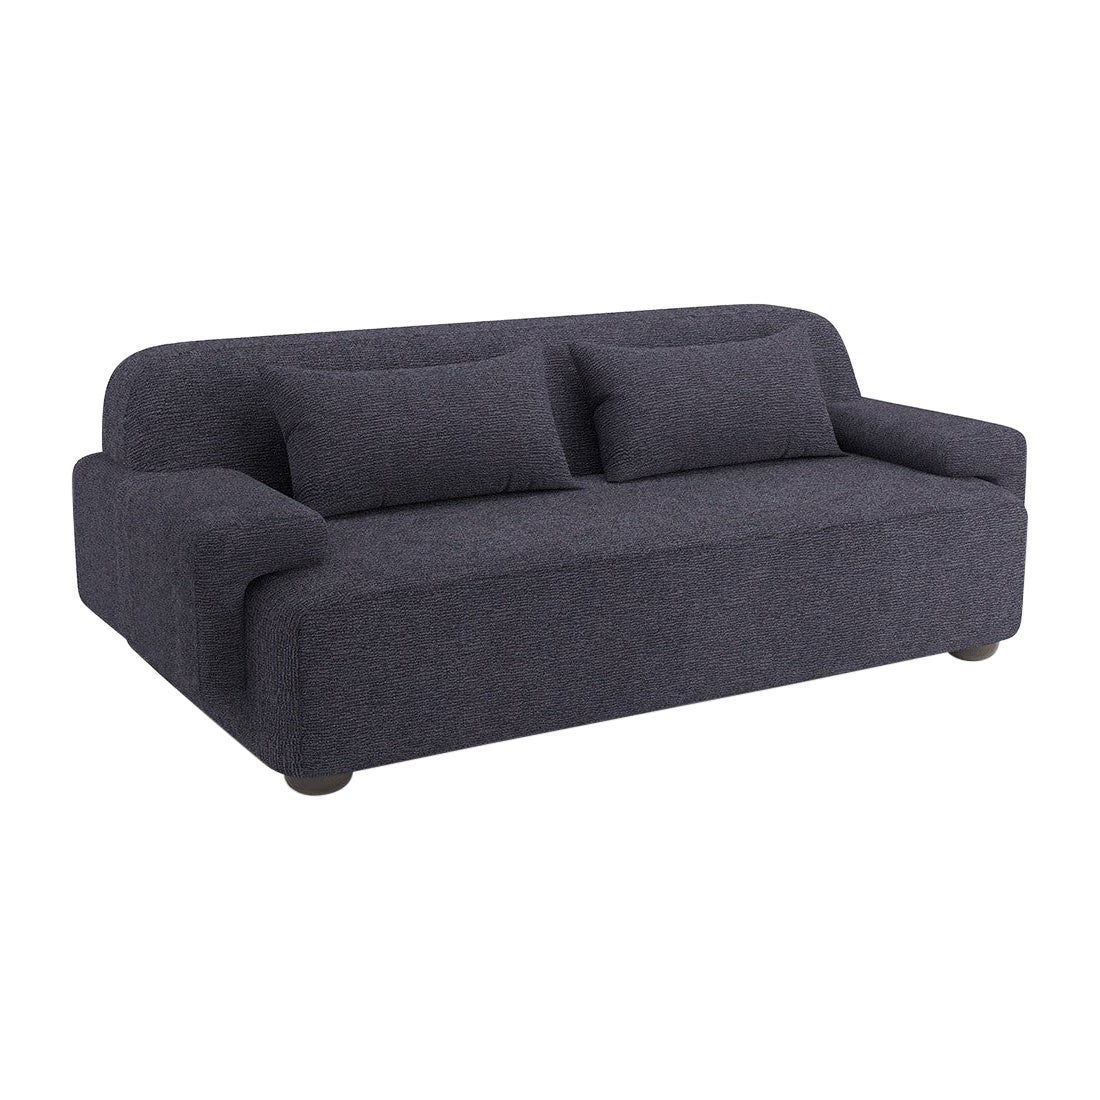 Popus Editions Lena 3 Seater Sofa in Anthracite Megeve Fabric with Knit Effect For Sale